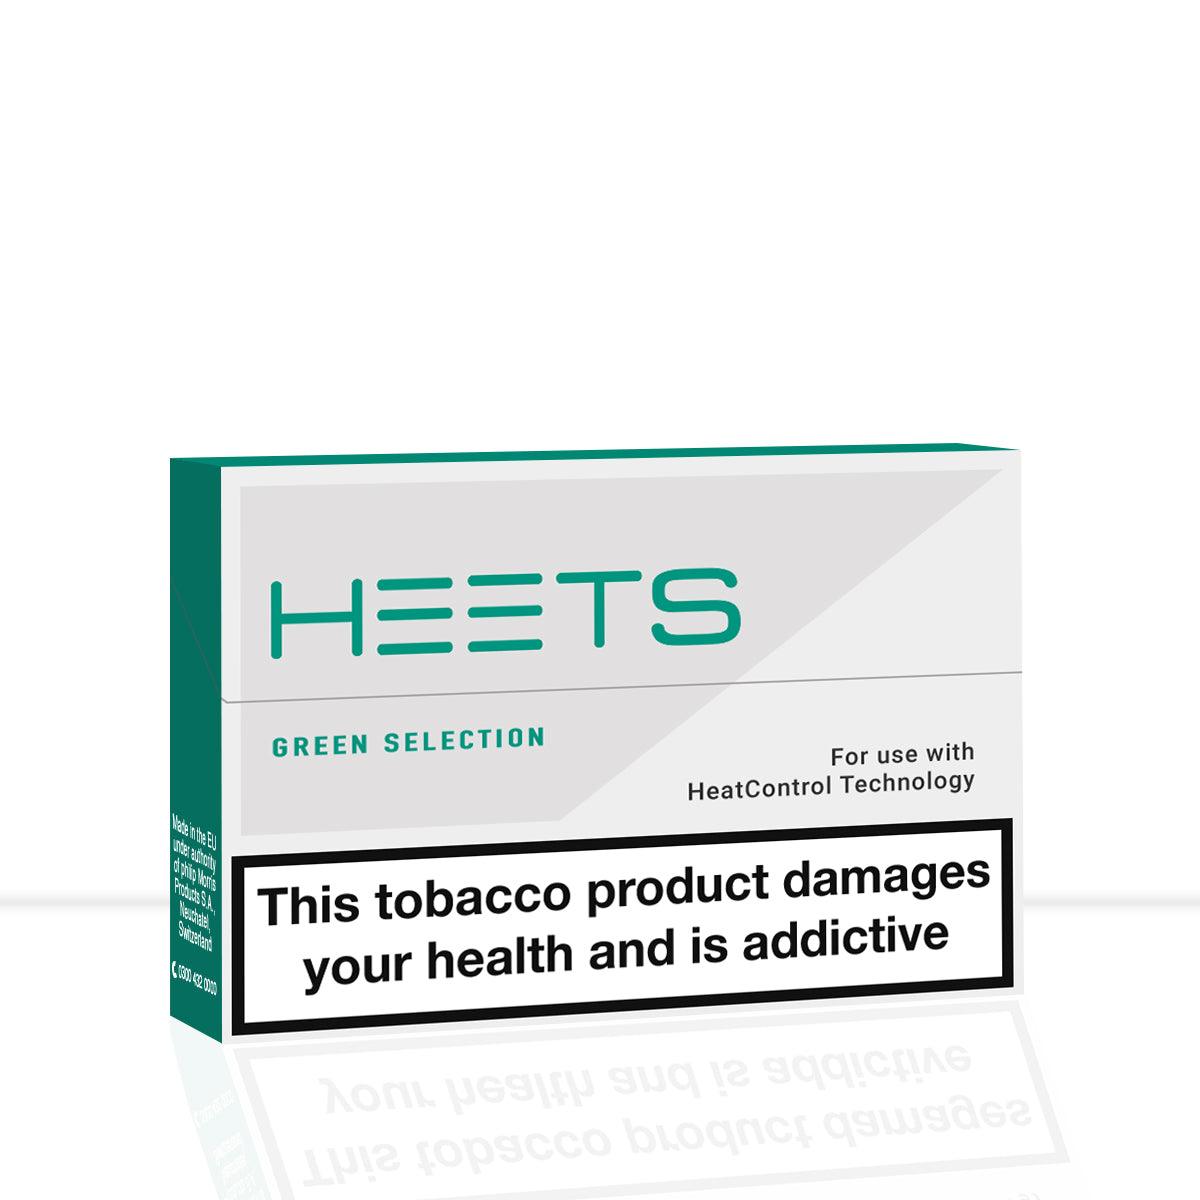 Green Heets IQOS - Heated Tobacco